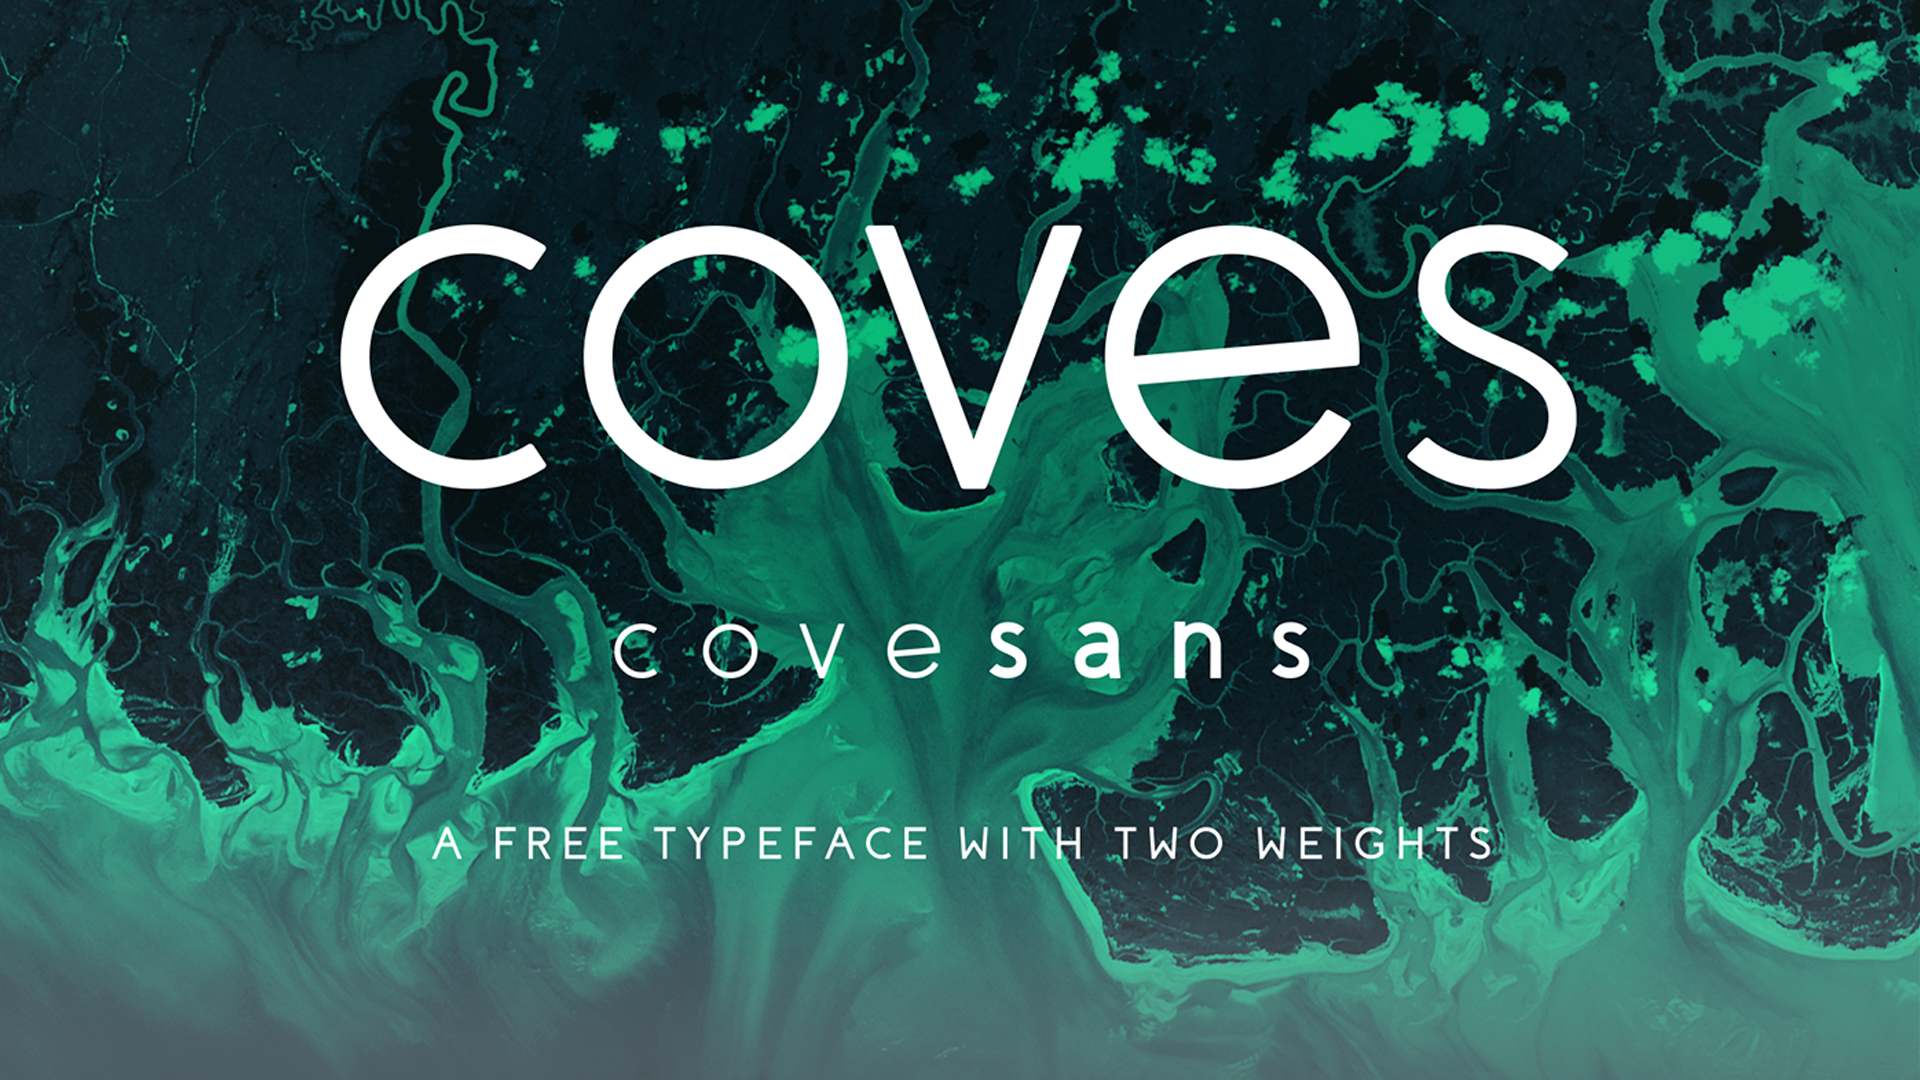 Coves